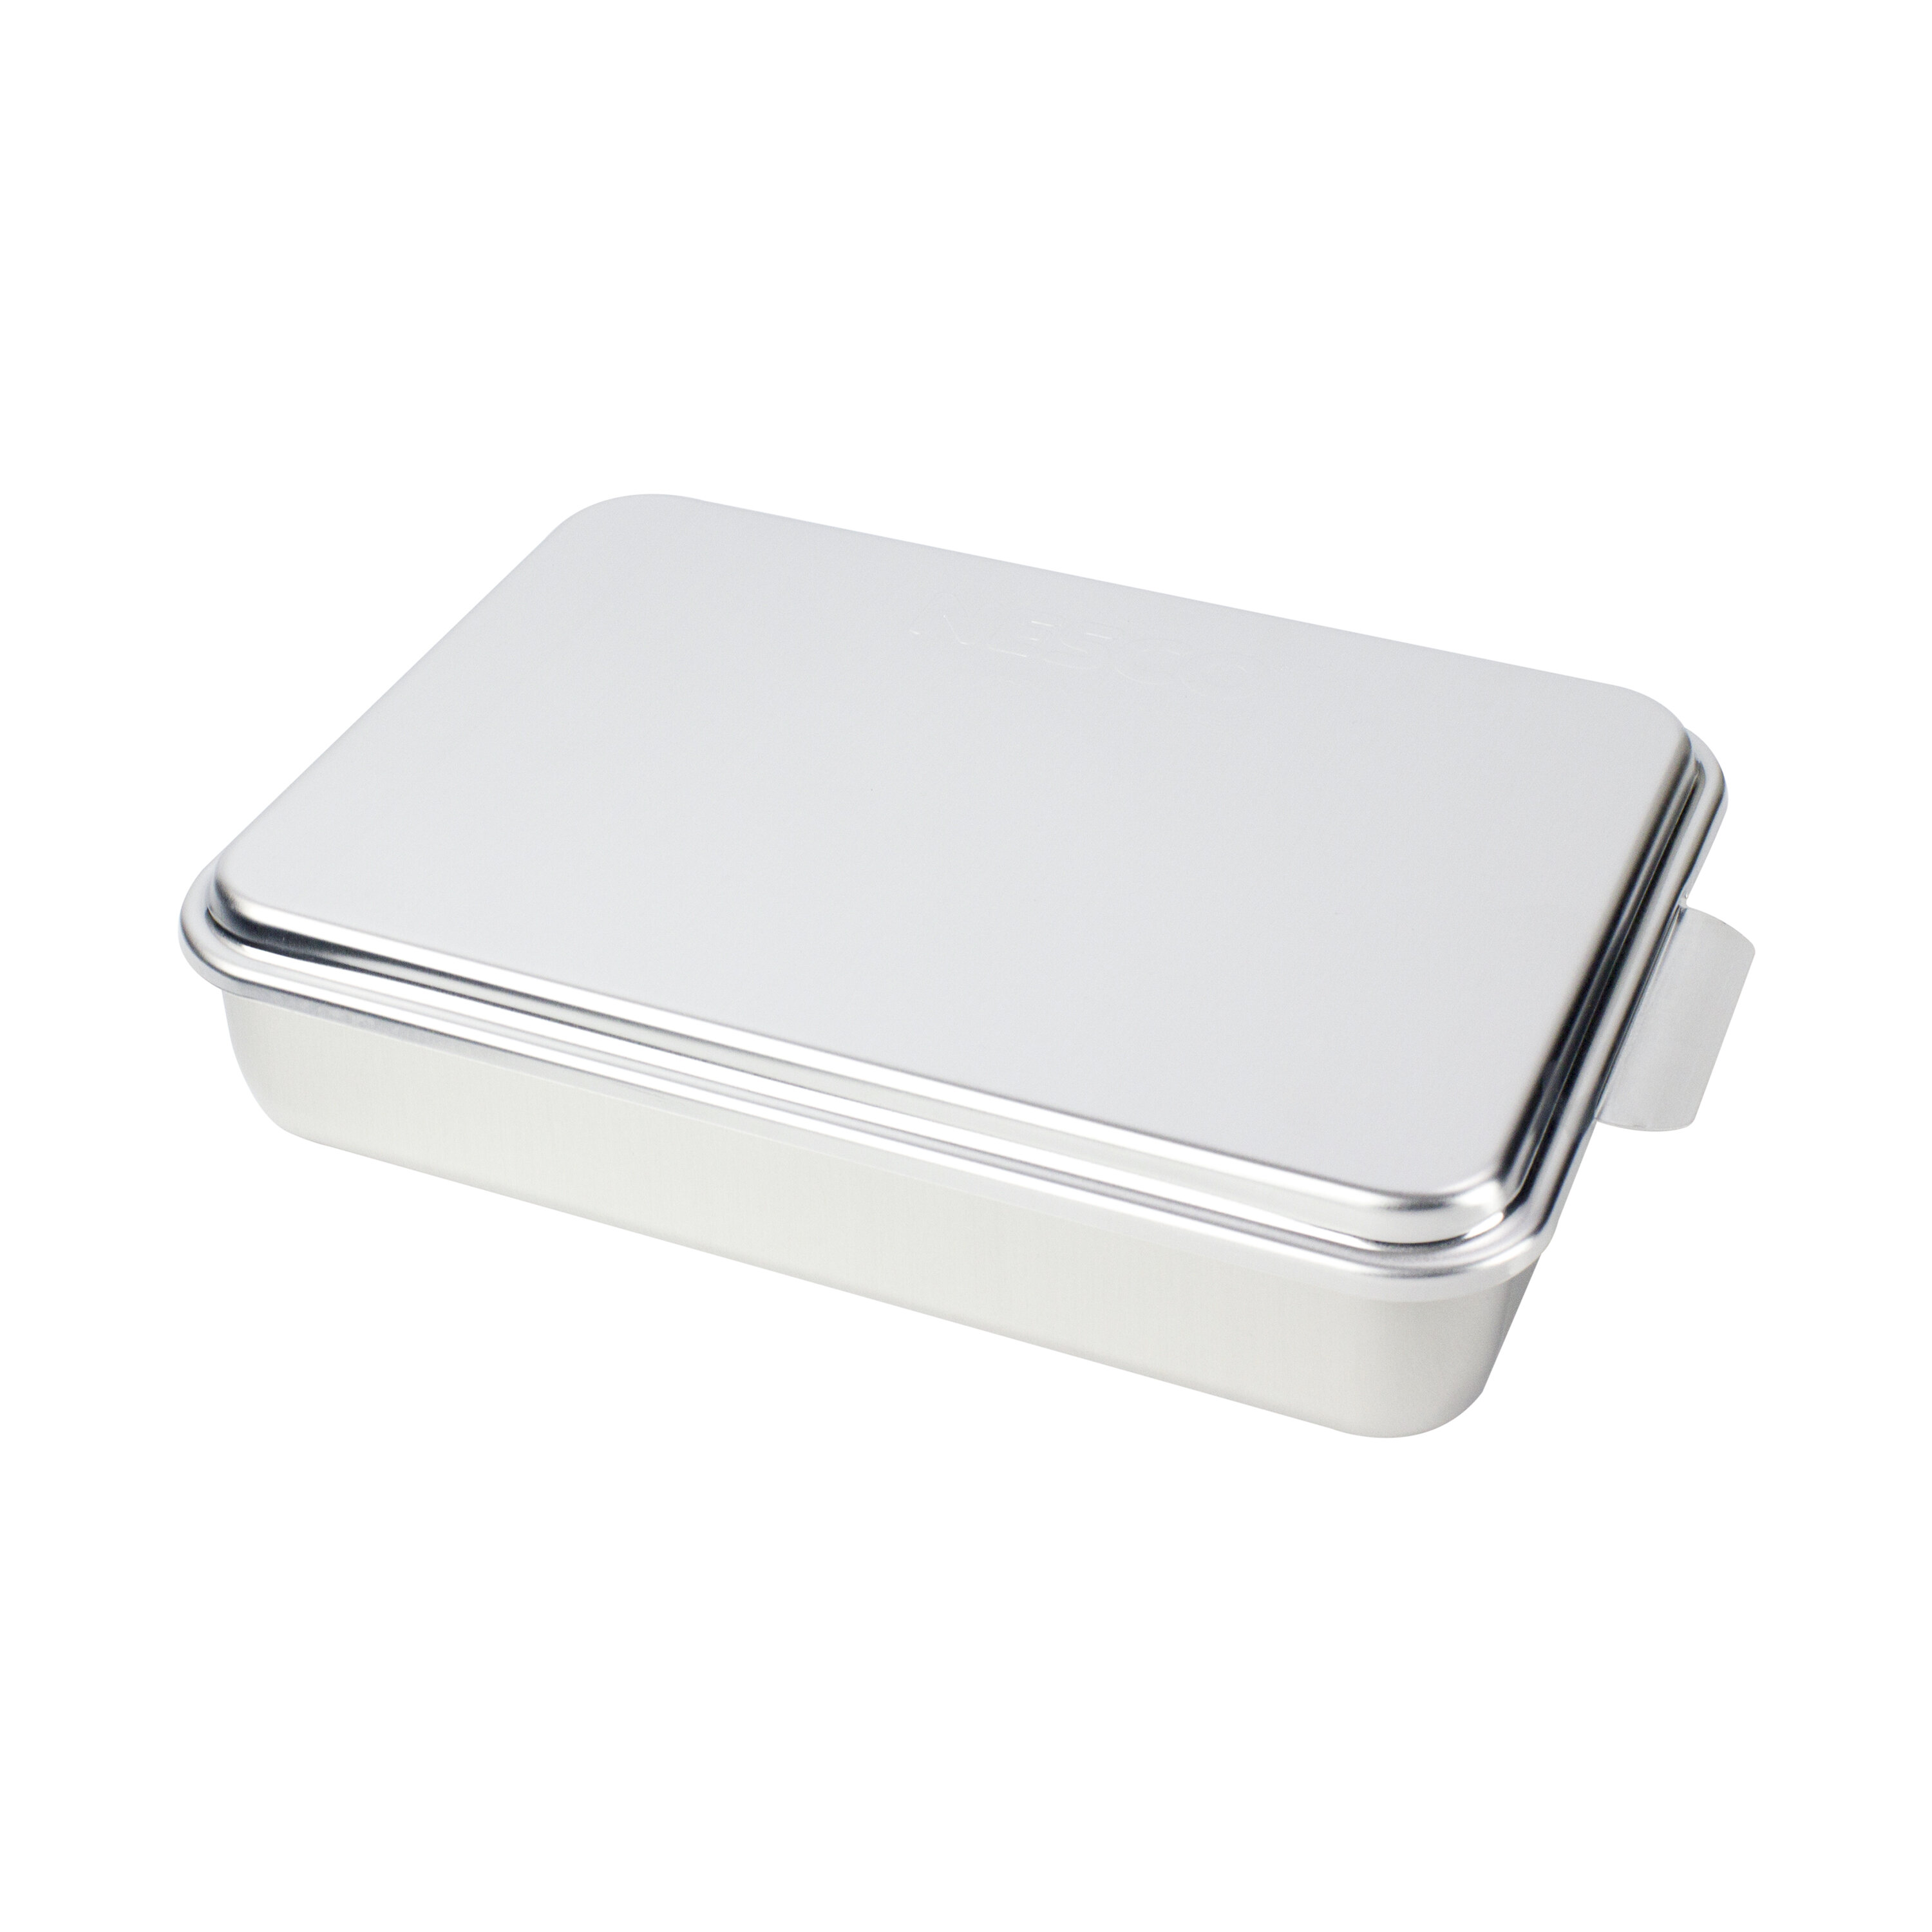 Nordic Ware Natural Aluminum Commercial Cake Pan with Lid, Rectangle Pan  with Lid Silver, 9 x 13